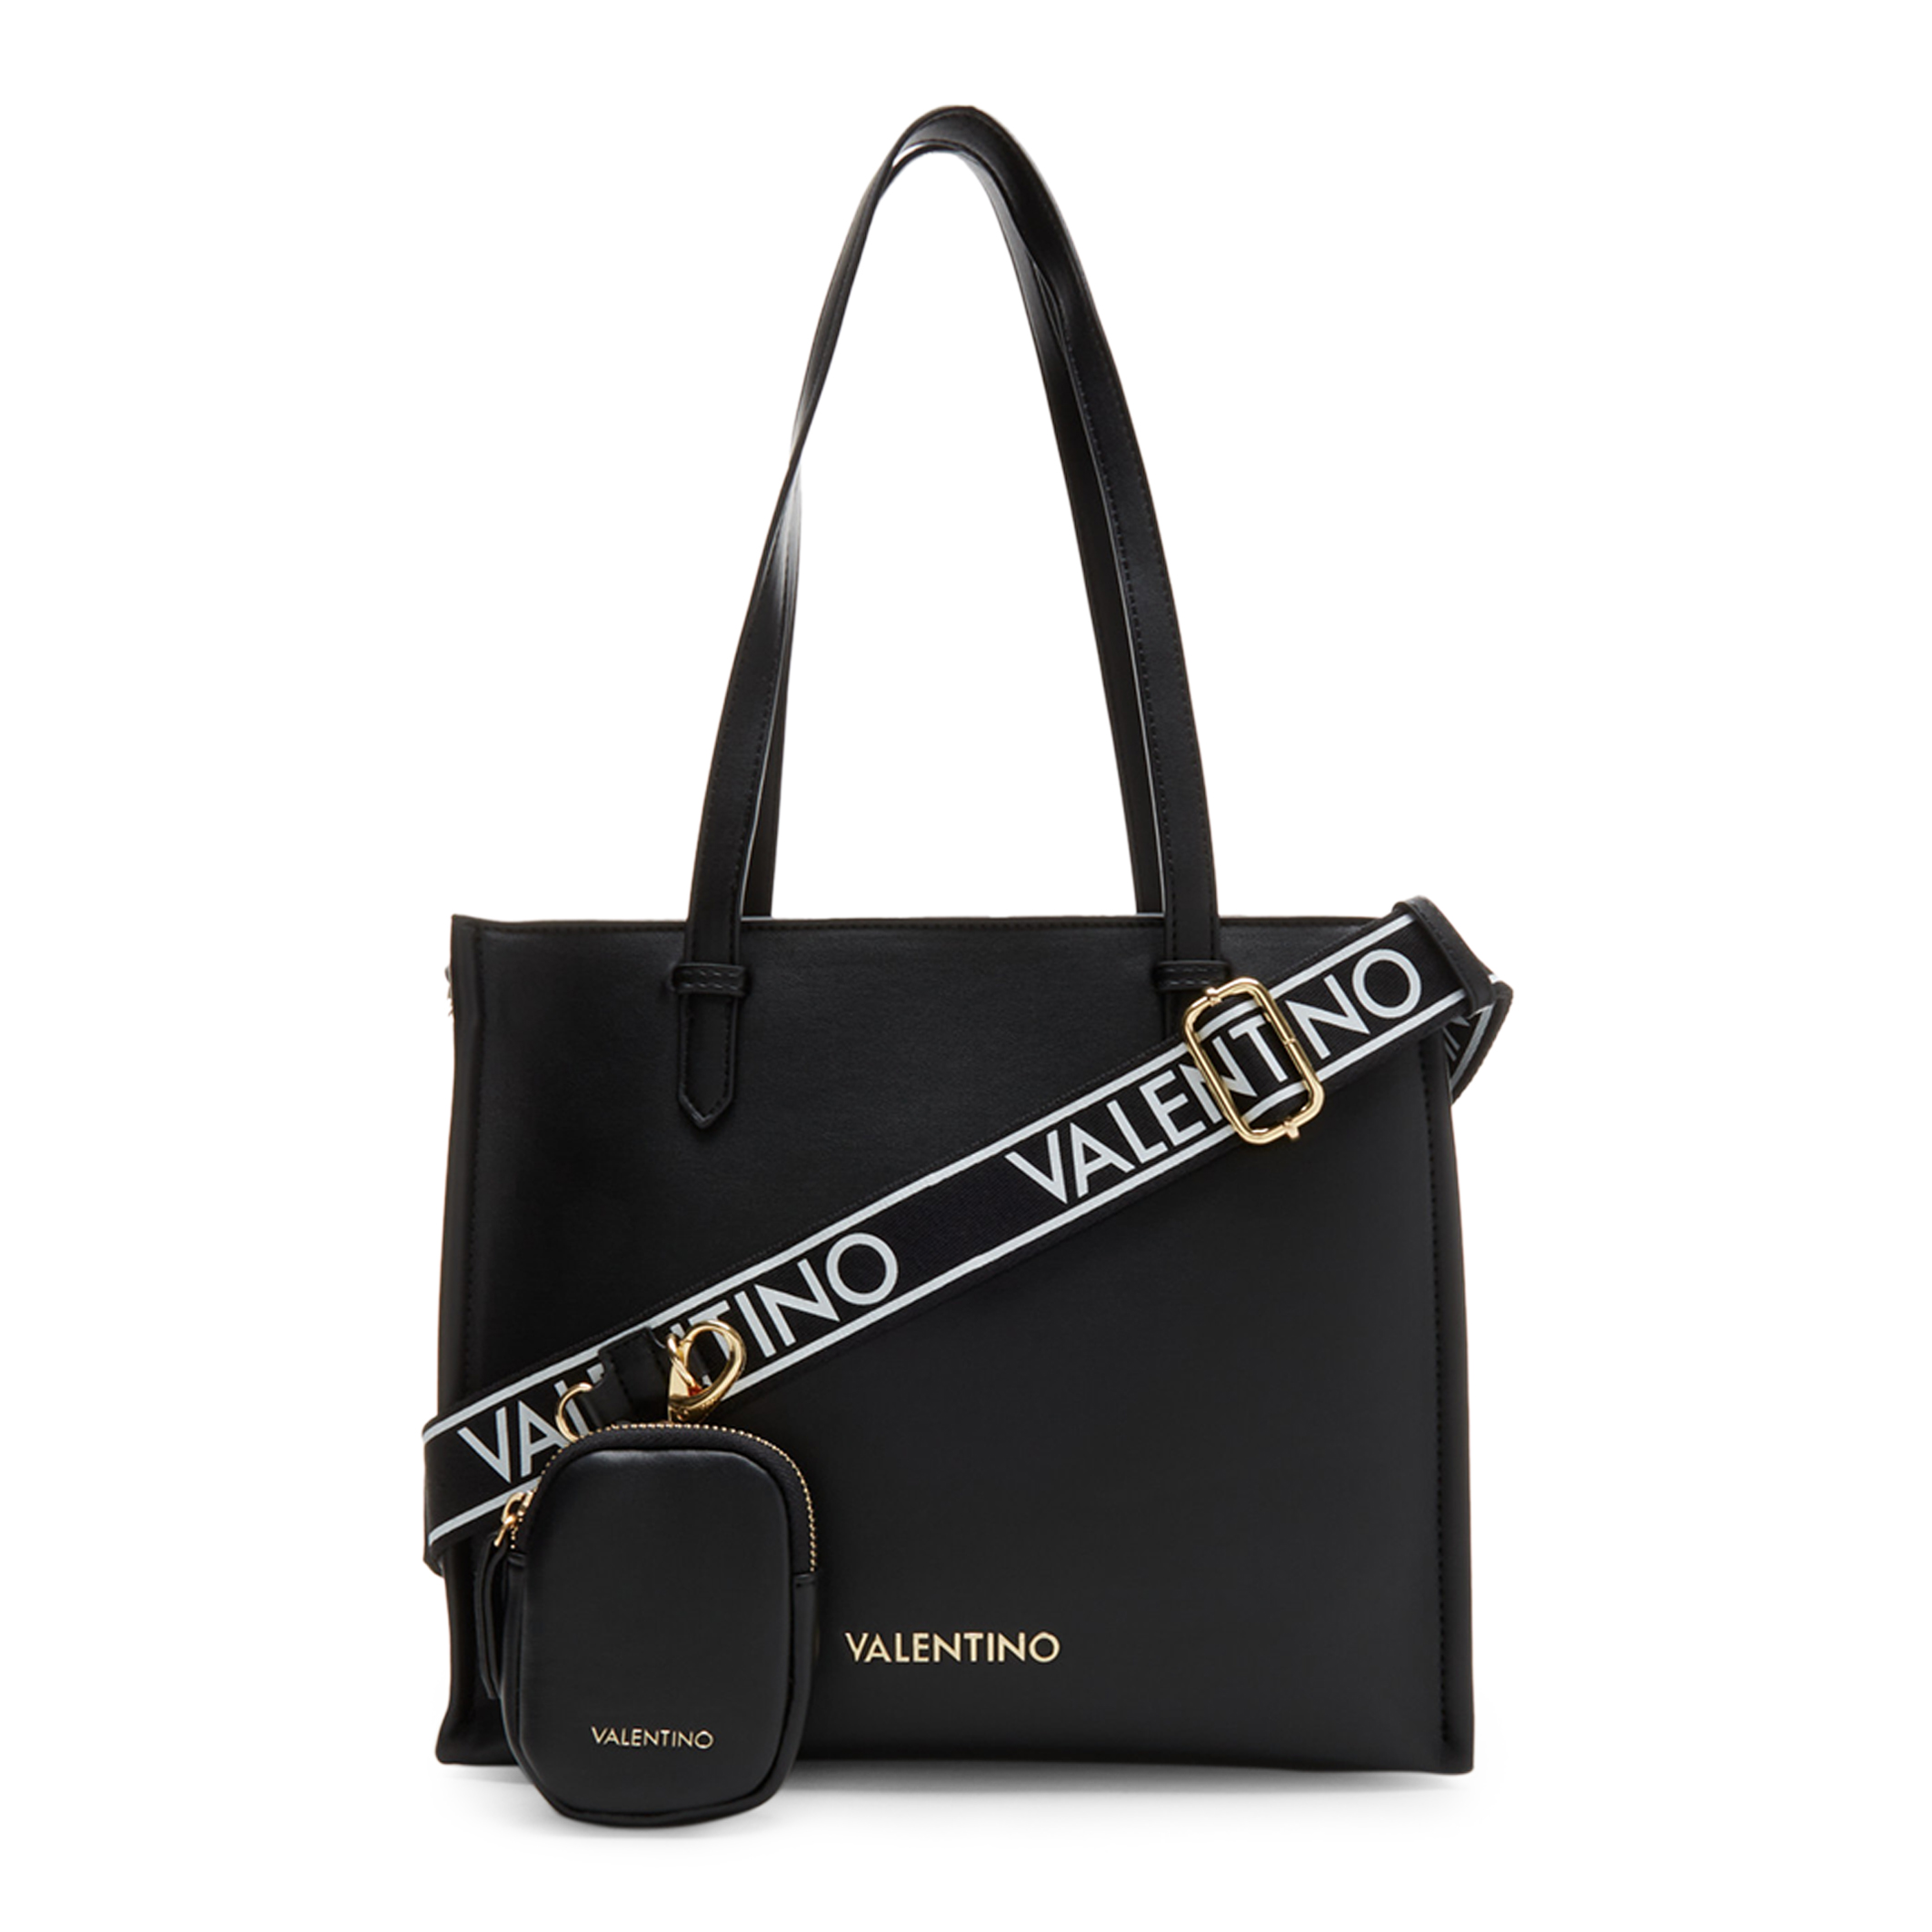 Valentino by Mario Valentino Black Shoulder bags for Women - AVERN-VBS5ZK01